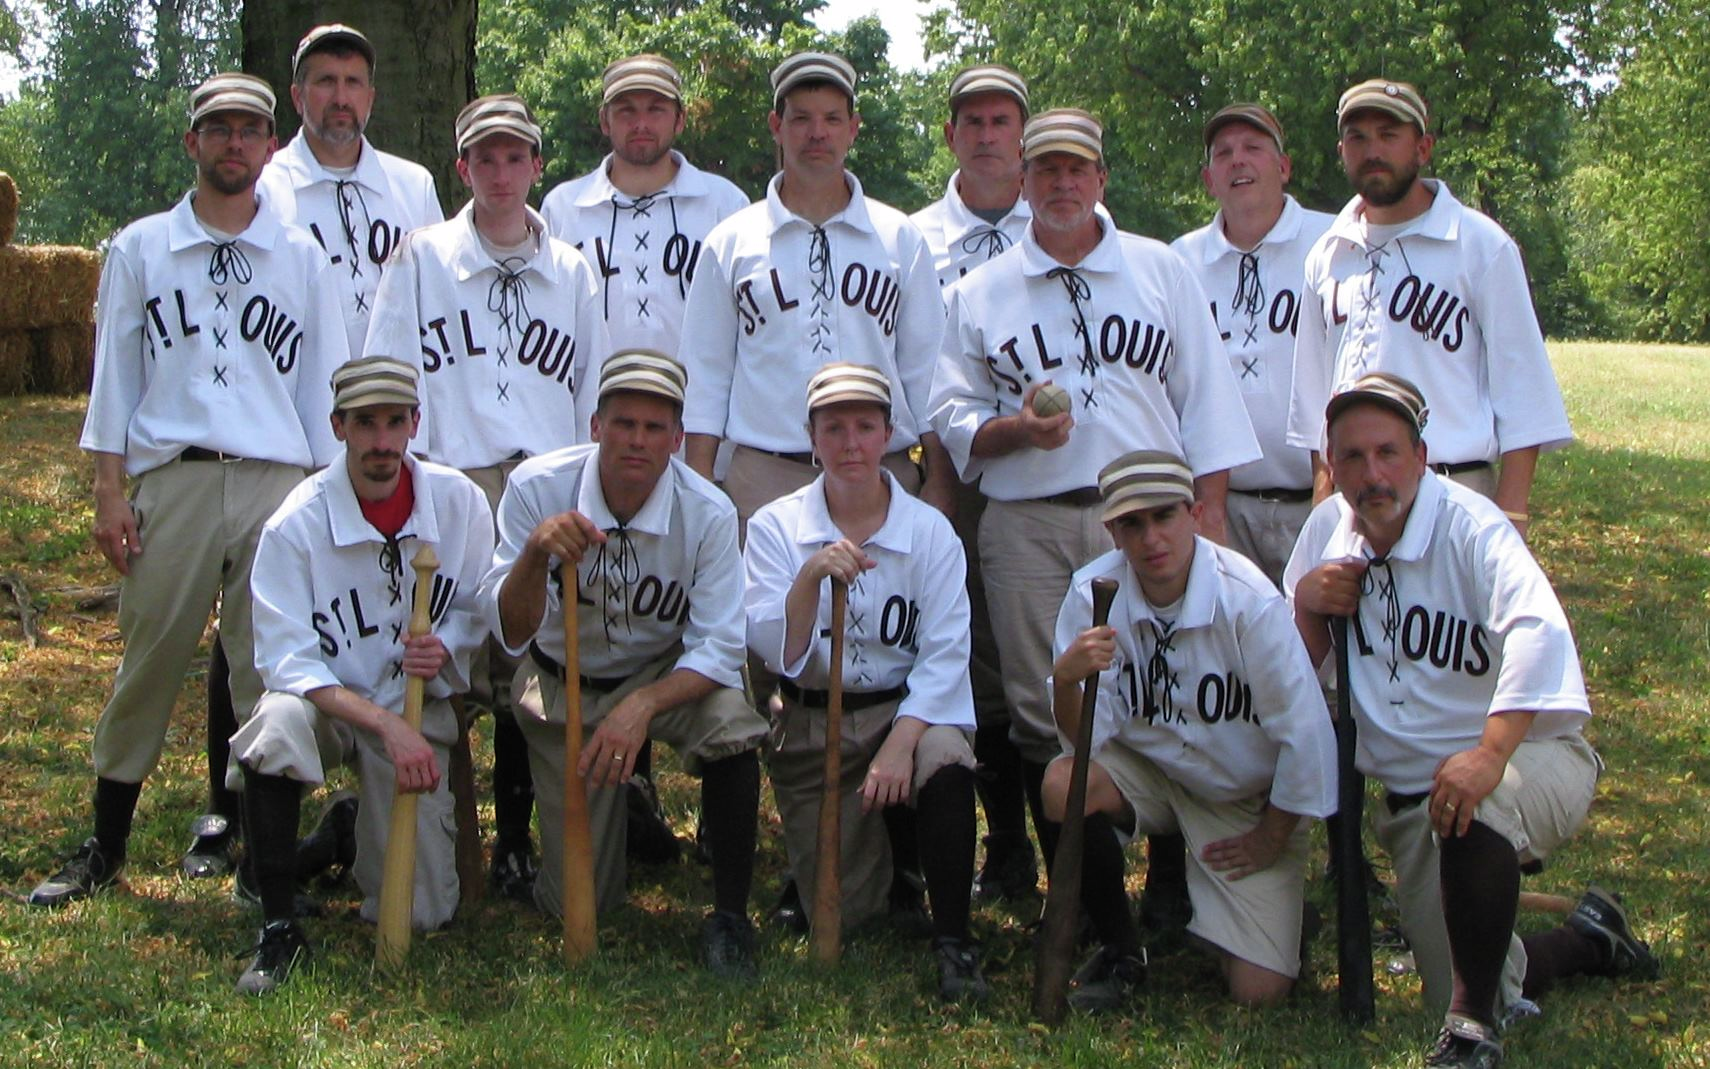 Vintage Base Ball returns to Forest Park this weekend